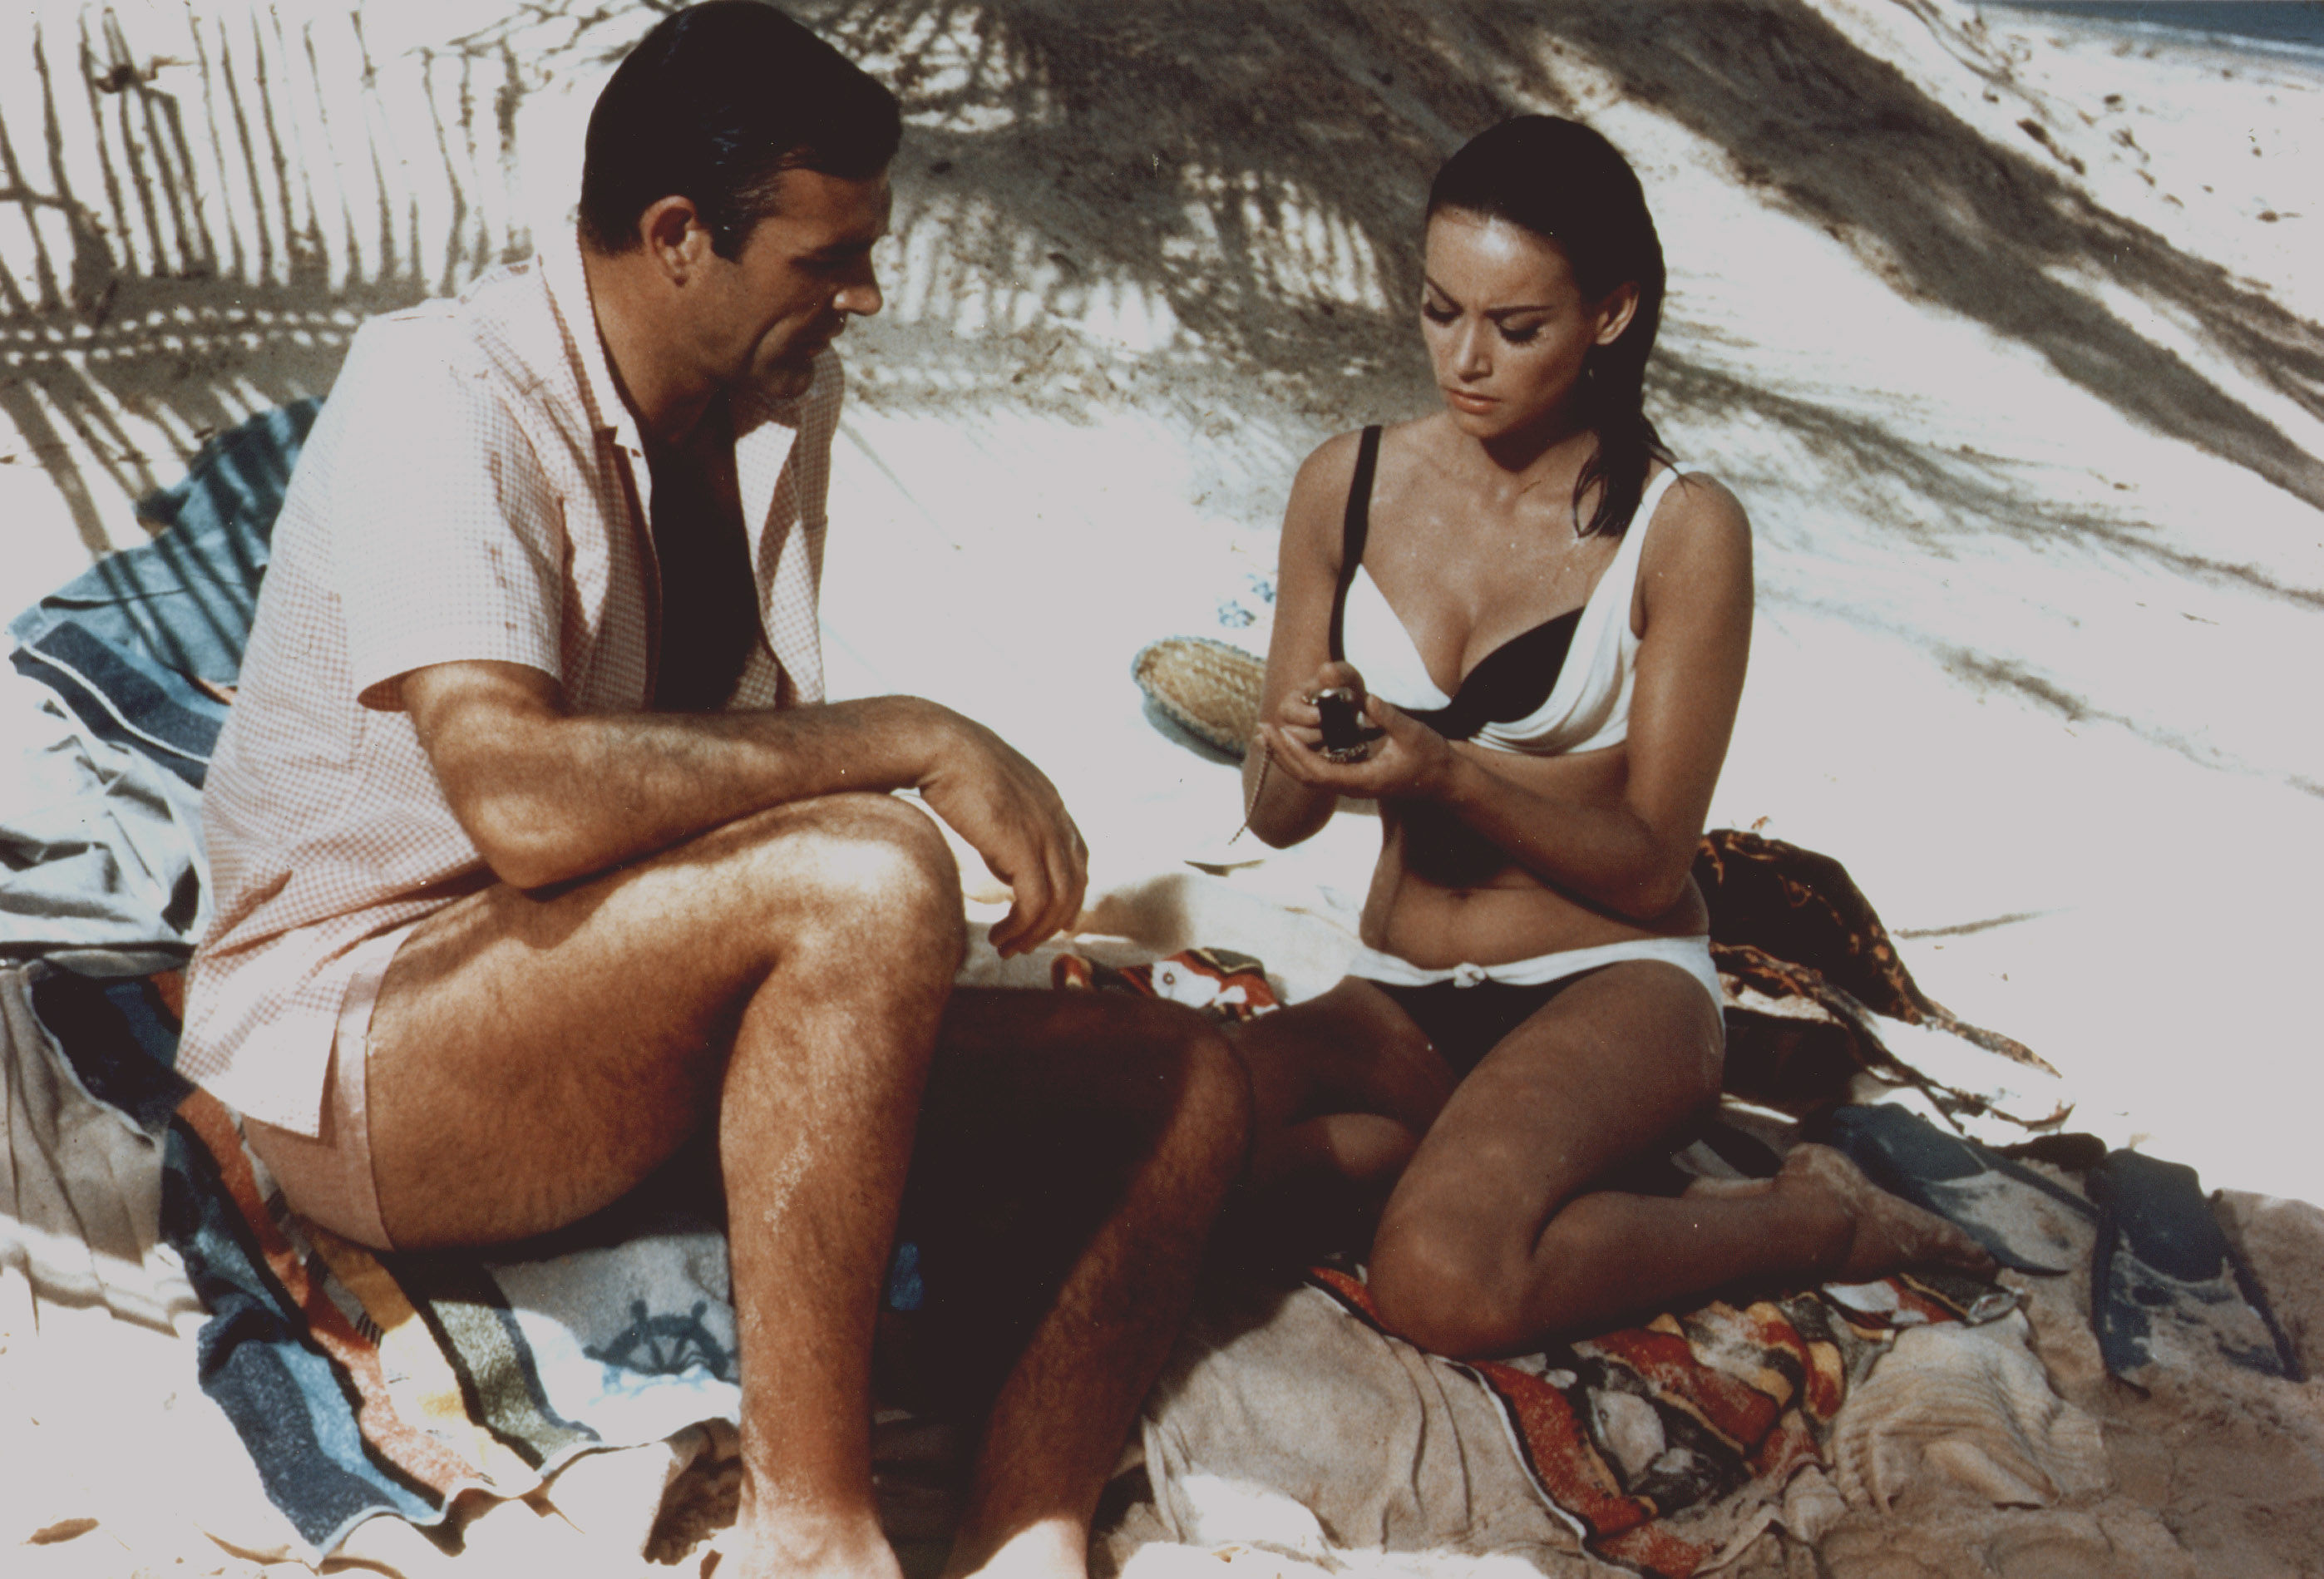 Actor Sean Connery and actress Claudine Auger on the set of 'Thunderball', directed by Terence Young,